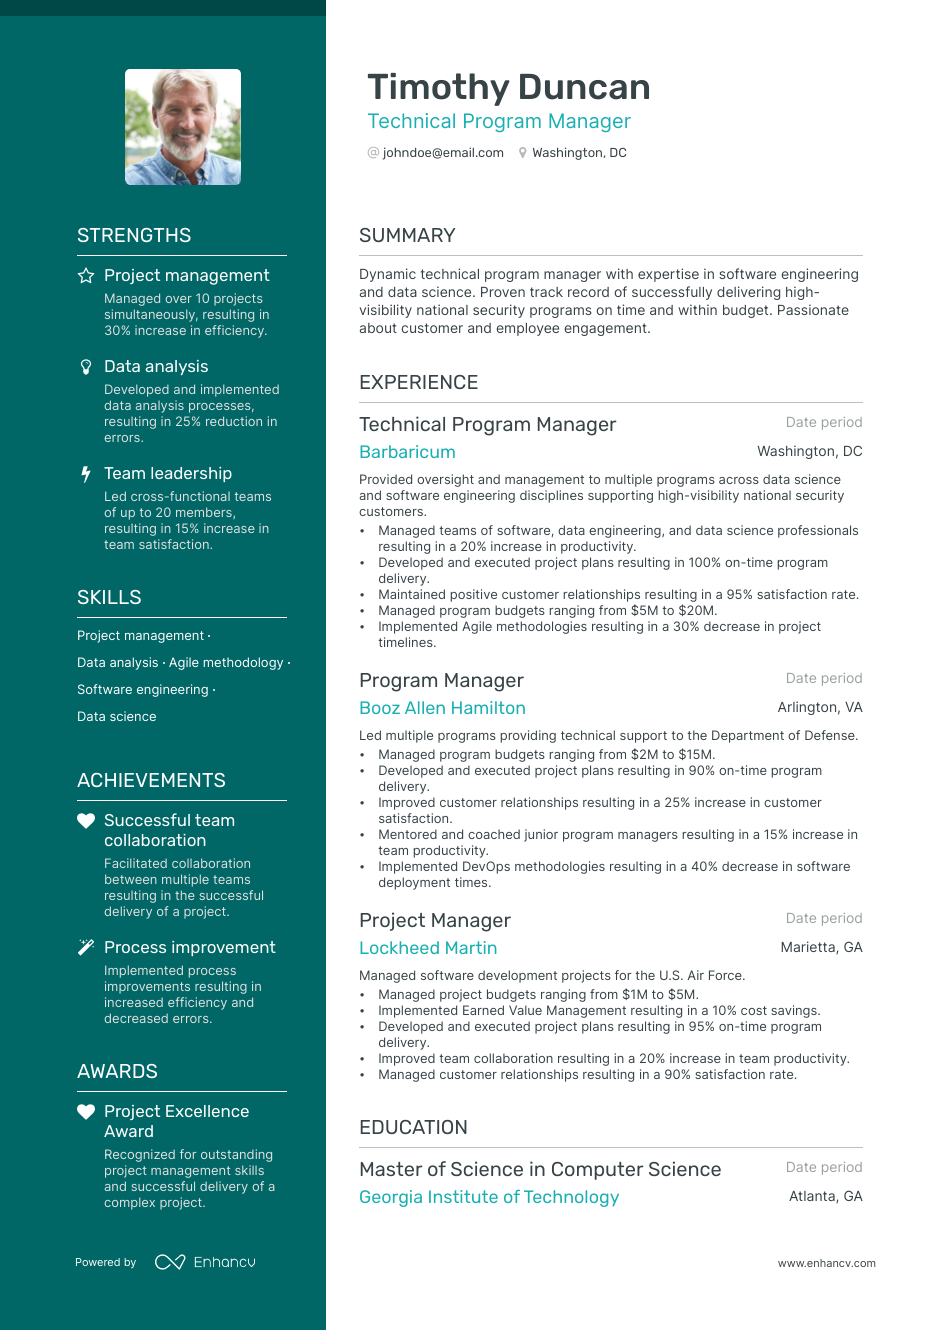 Technical Program Manager resume example